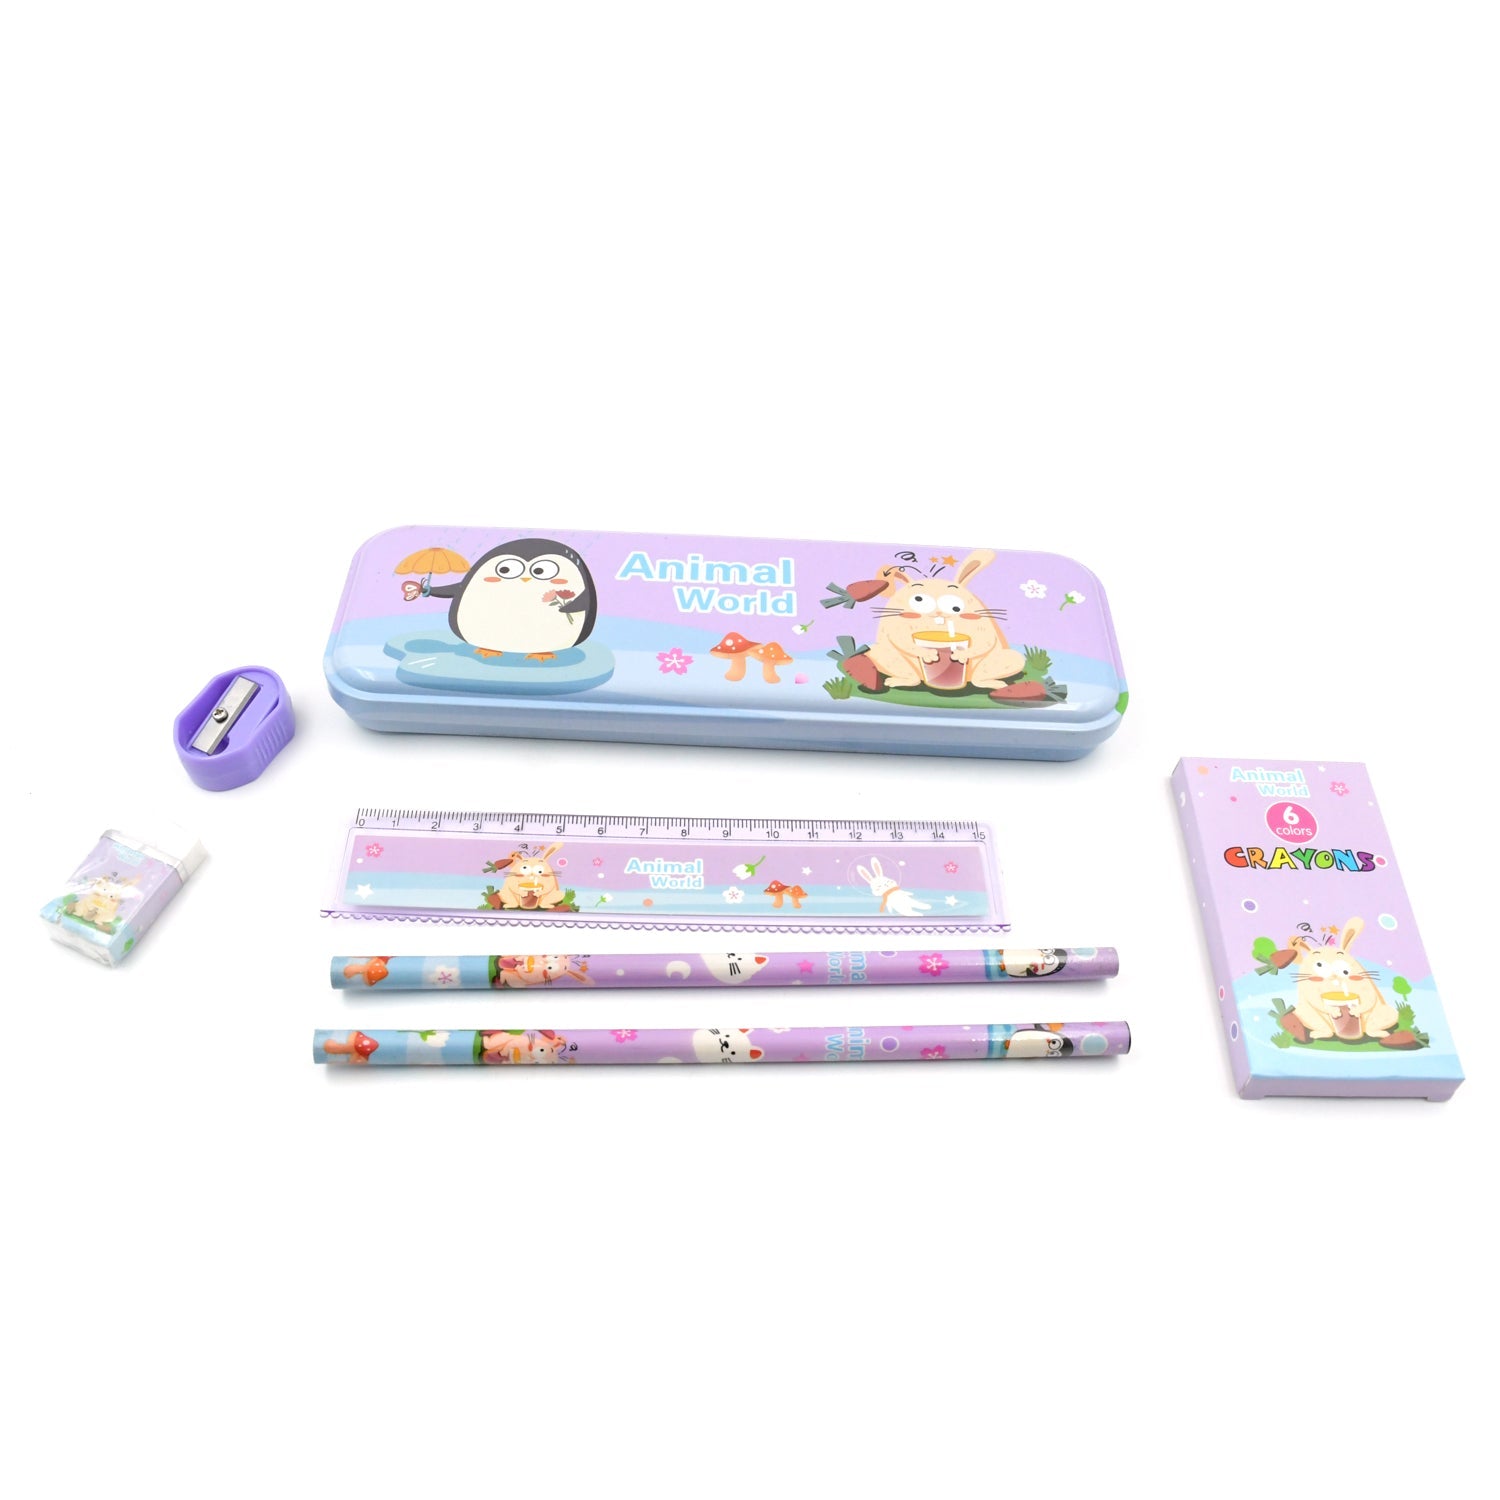 4297 School Supplies Stationery Kit with 1 Pencil Box Case 2 Pencils 6 Crayon Colors 1 Ruler Scale 1 Eraser 1 Sharpener Stationary Kit for Girls Pencil Pen Book Eraser Sharpener Crayons - Stationary Kit Set for Kids Birthday Gift (12 Pc Set)